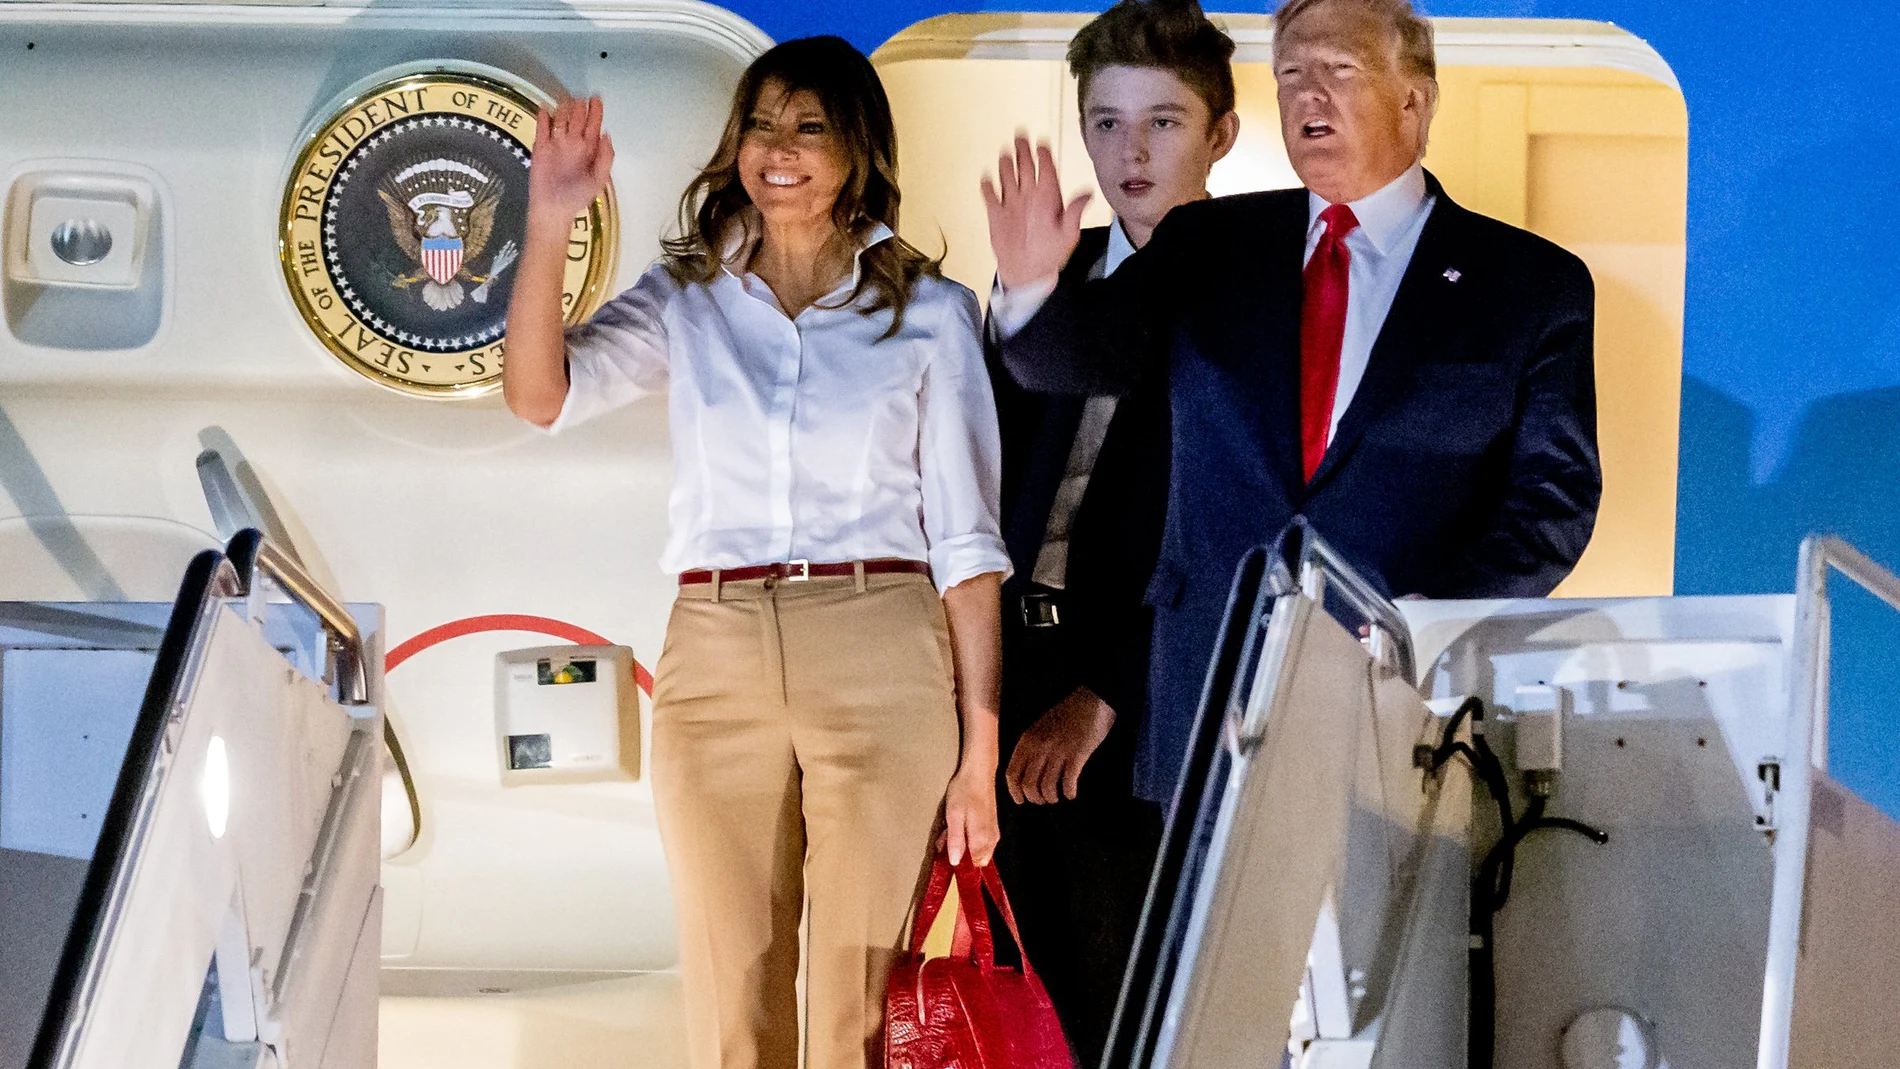 US presidential family arrives in Florida